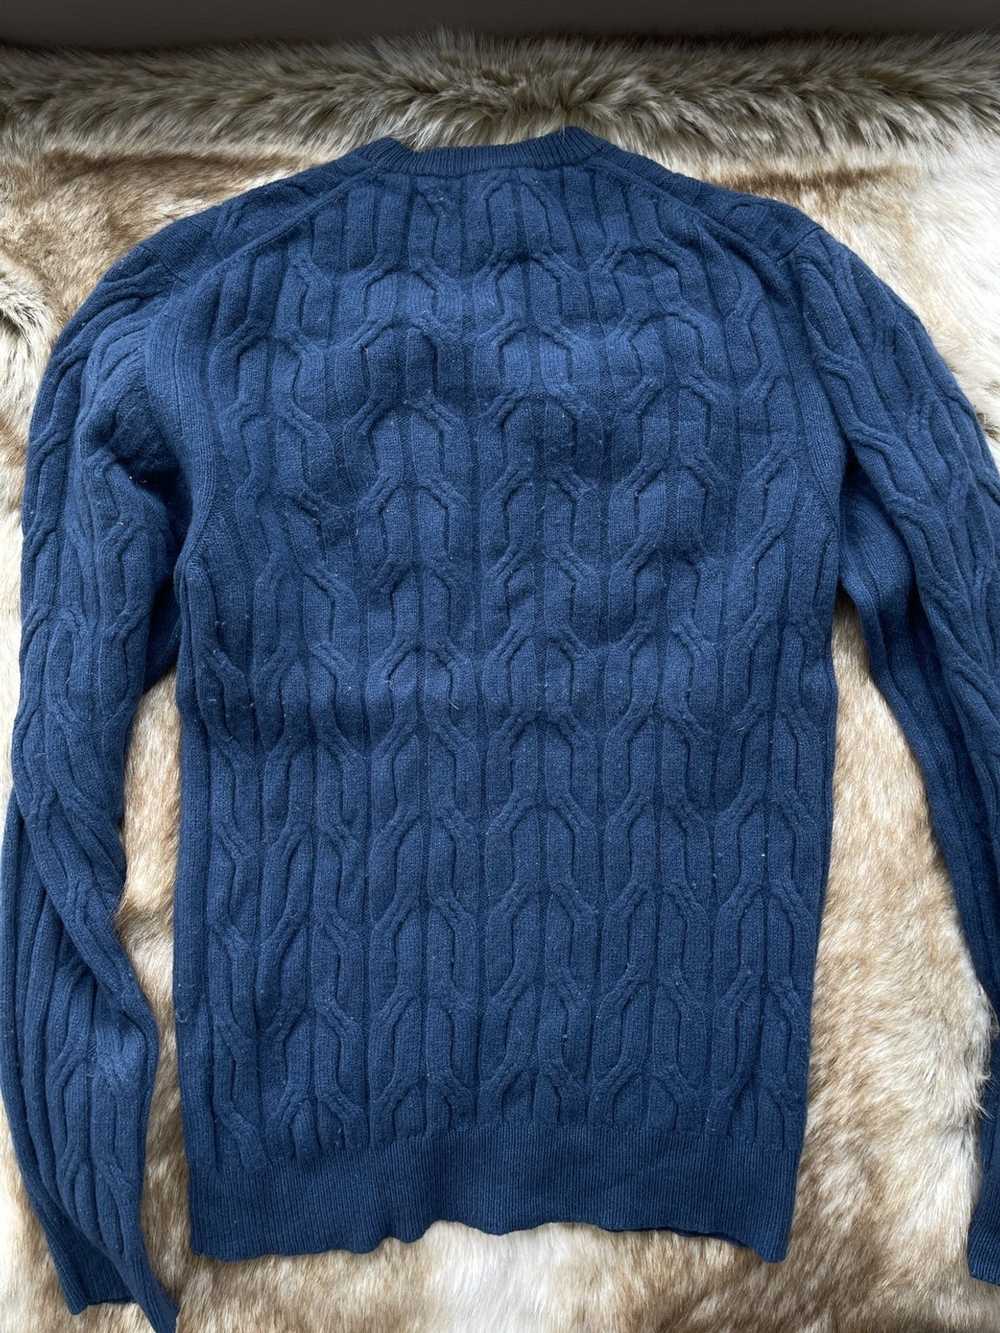 Lanvin Cable knit sweater - image 5